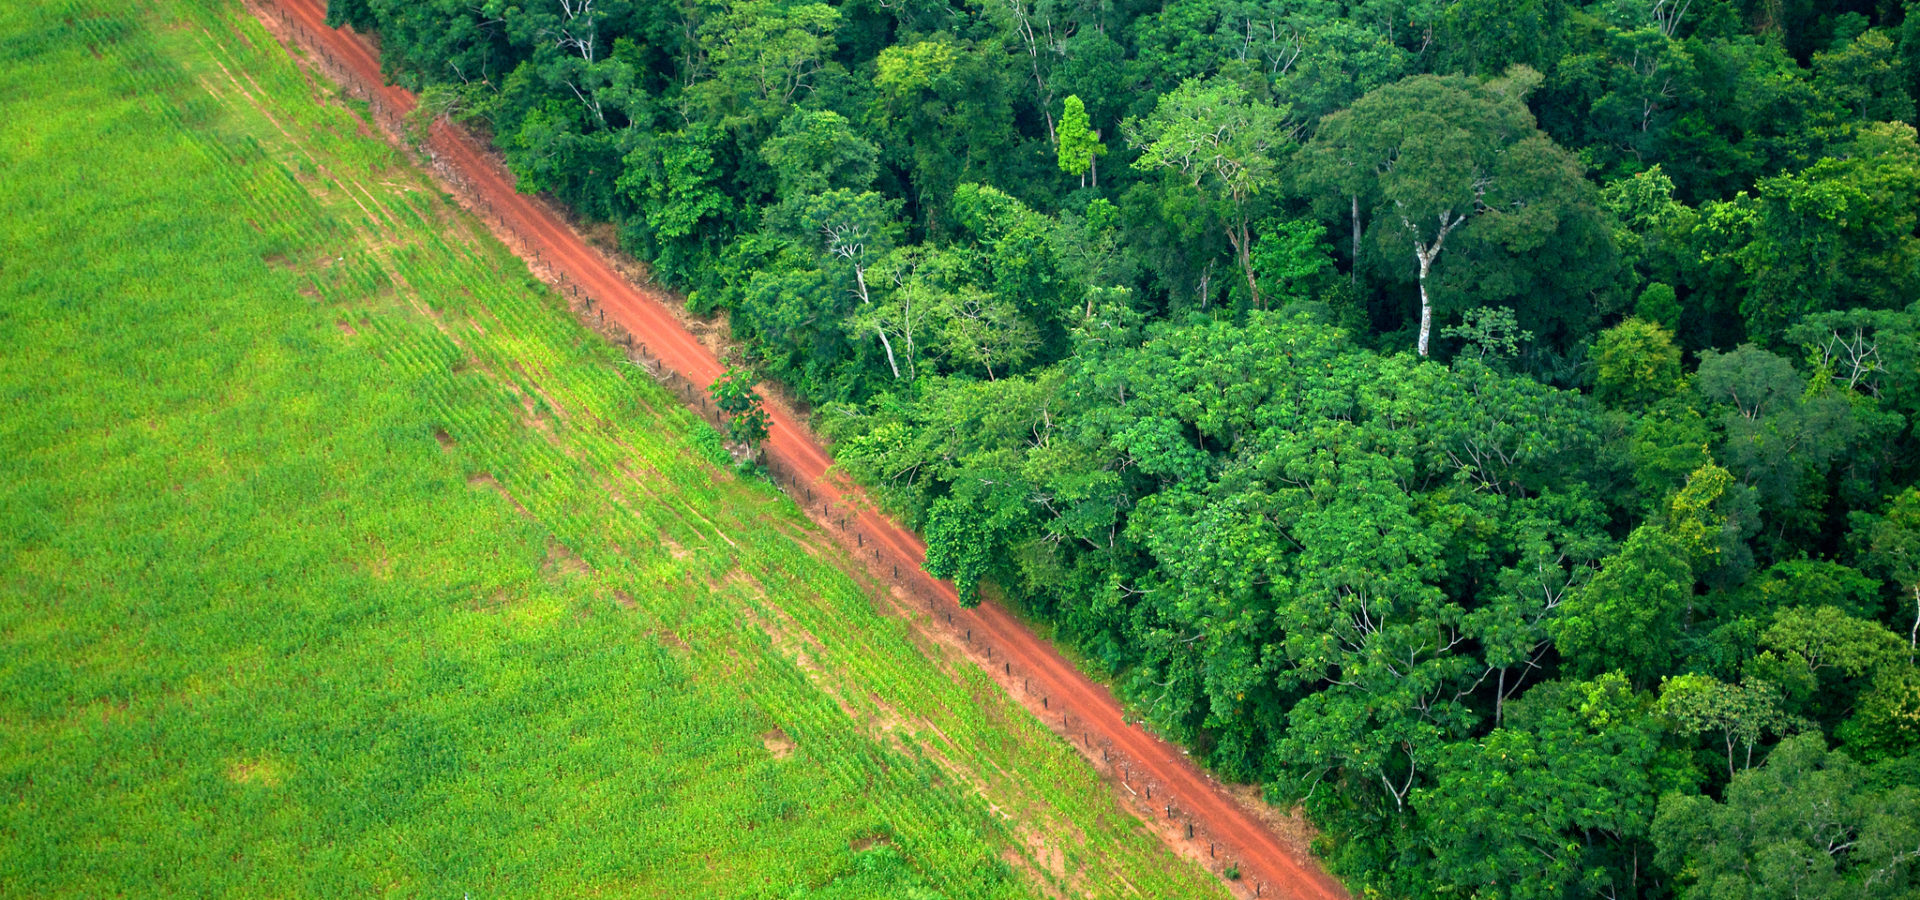 An aerial shot shows the contrast between forest and agricultural landscapes near Rio Branco, Acre, Brazil. (Flickr / Center For International Forestry Research / Kate Evans)